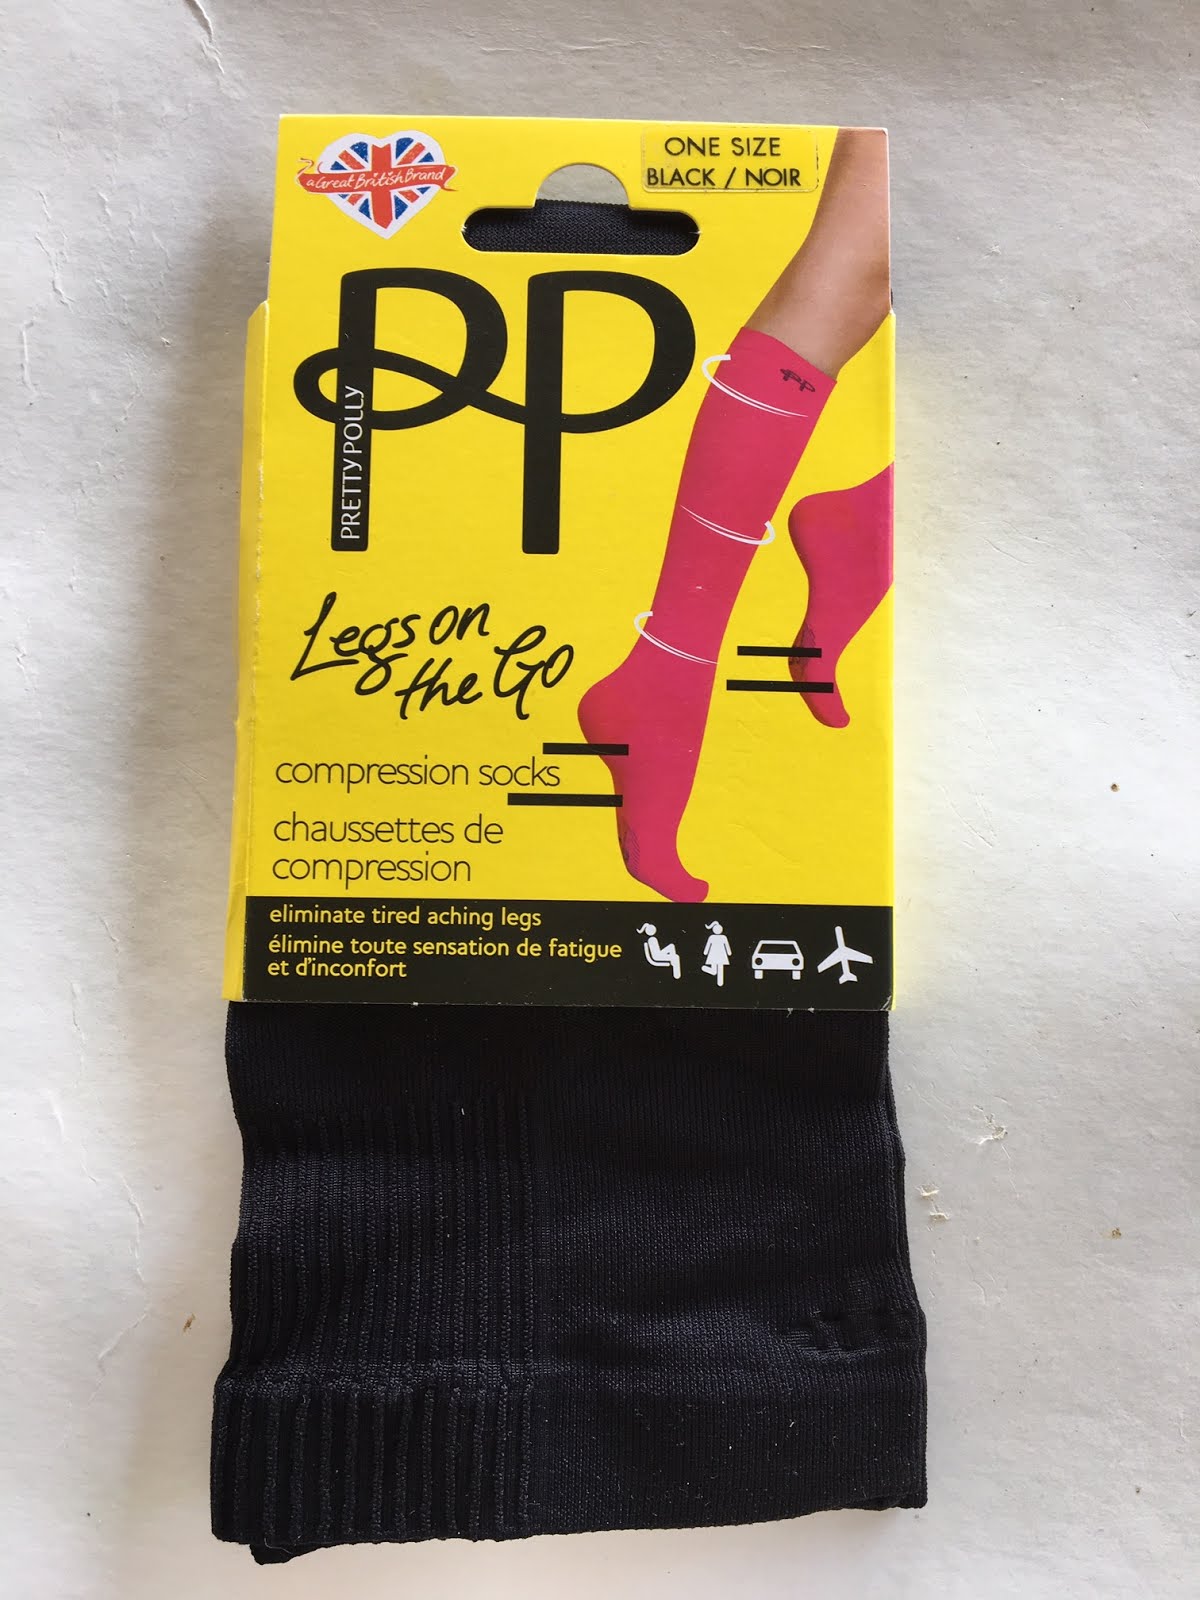 Hosiery For Men: Reviewed: Pretty Polly Legs On The Go Compression